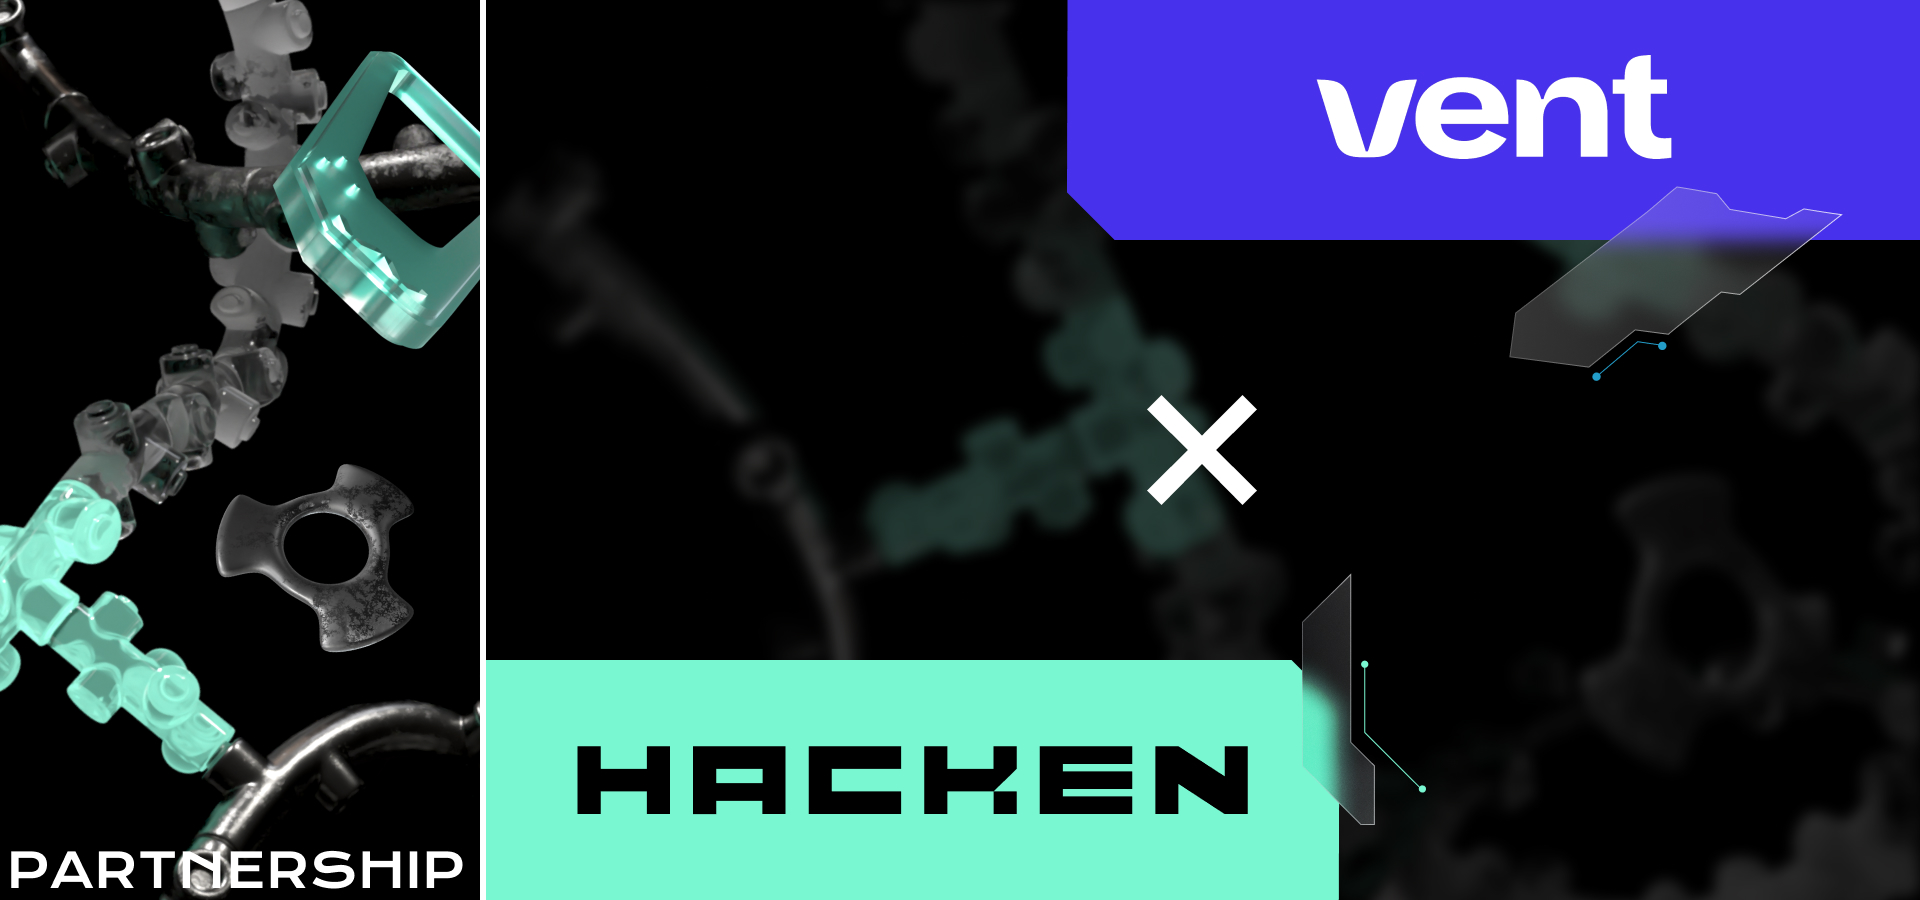 New partnership: Hacken will secure incubation and launch of DeFi and Metaverse projects of VENT